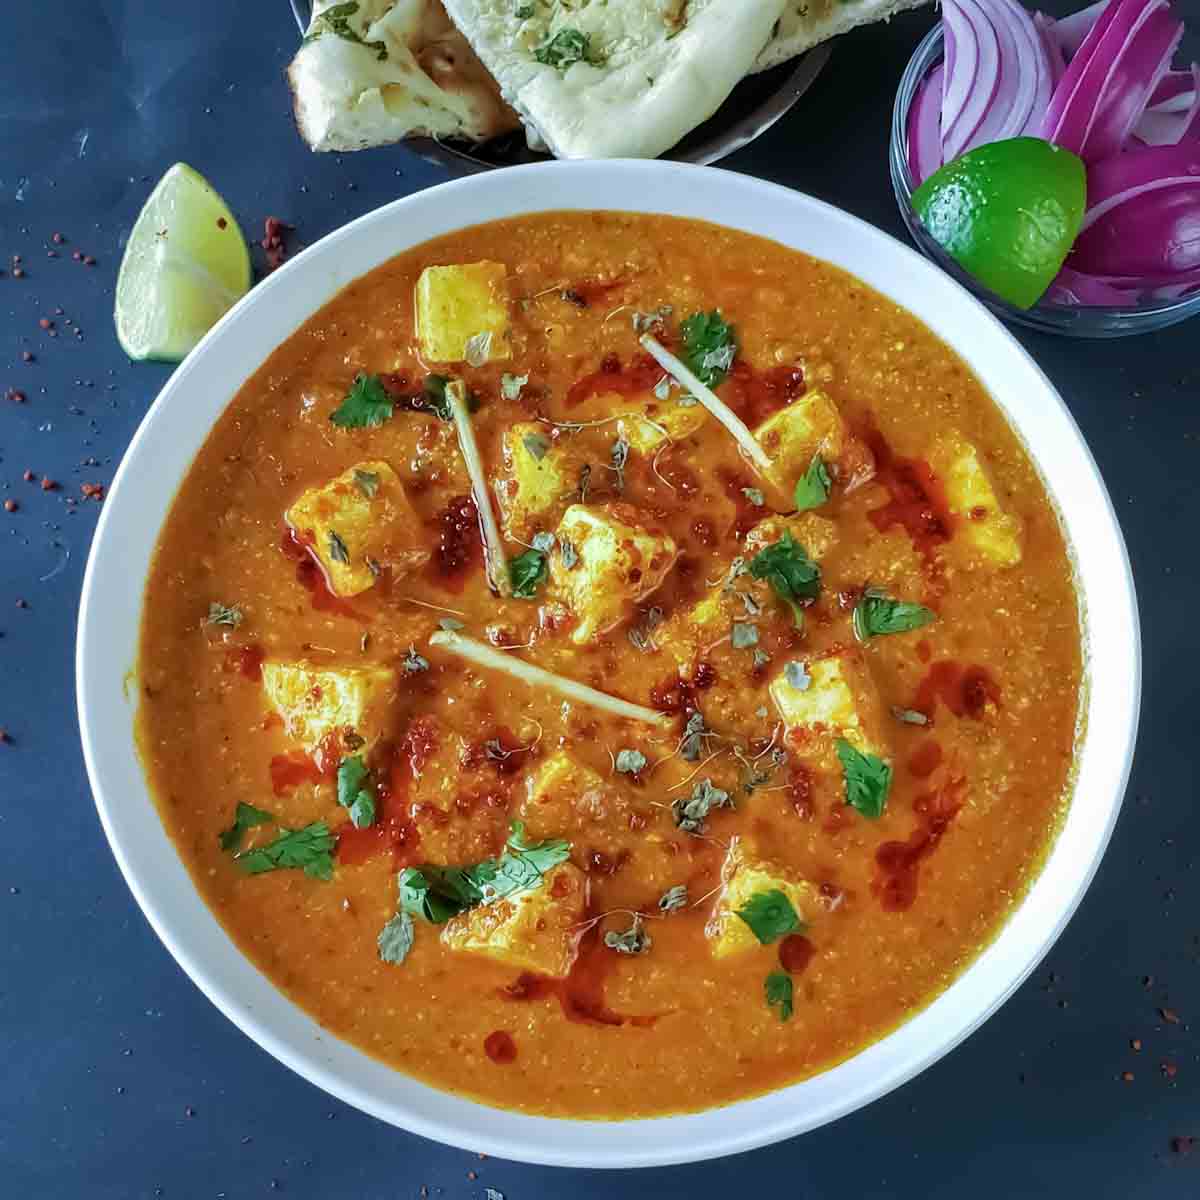 Achari paneer which is Indian dinner curry , made with soft cottage cheese cooked in pickle spice mix and onion tomato gravy, served for dinner.